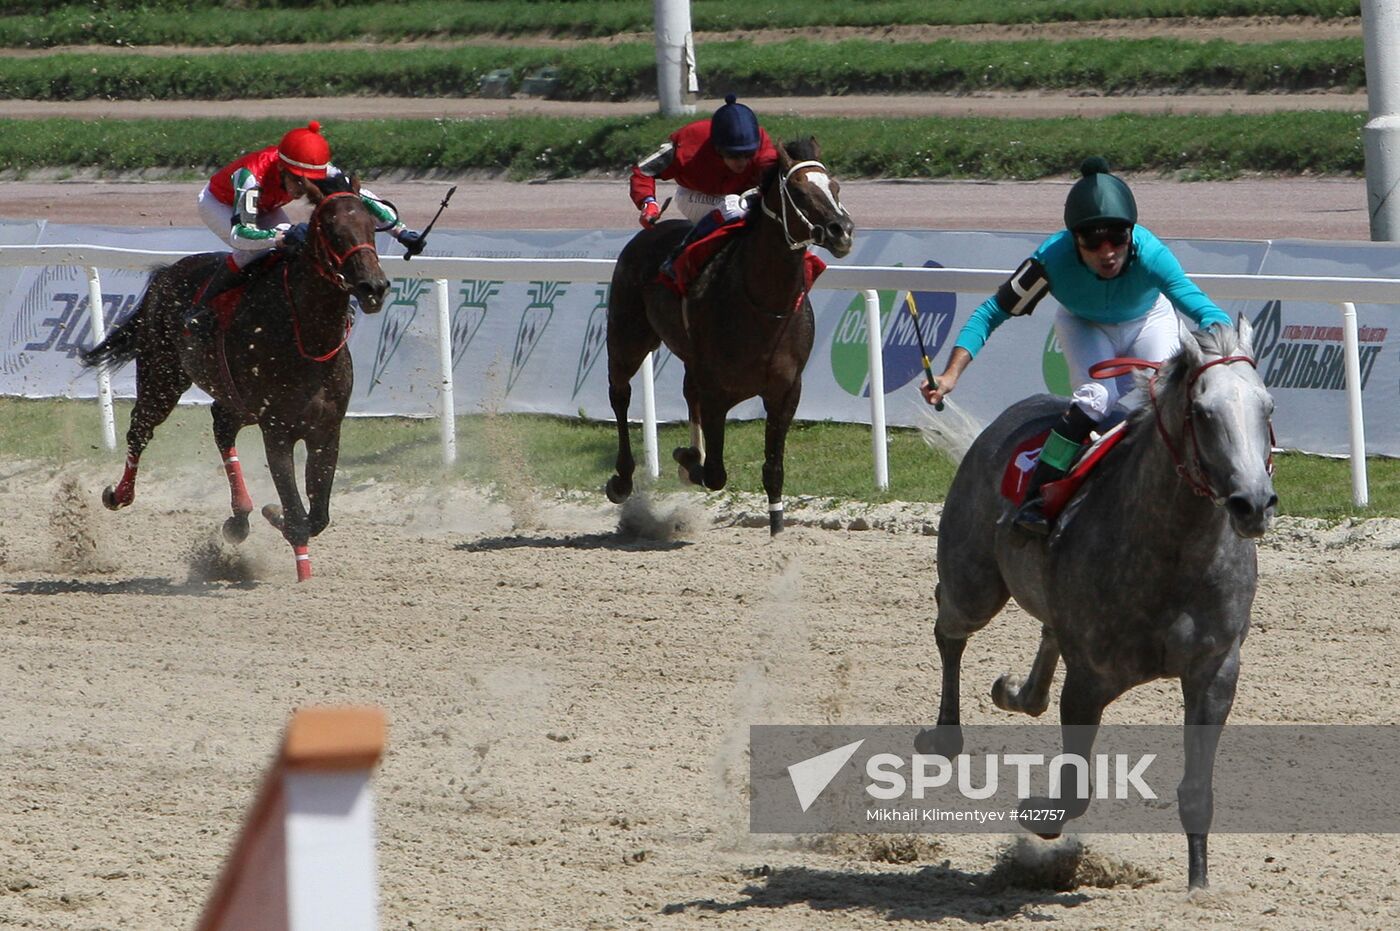 Presidential Horserace in Moscow